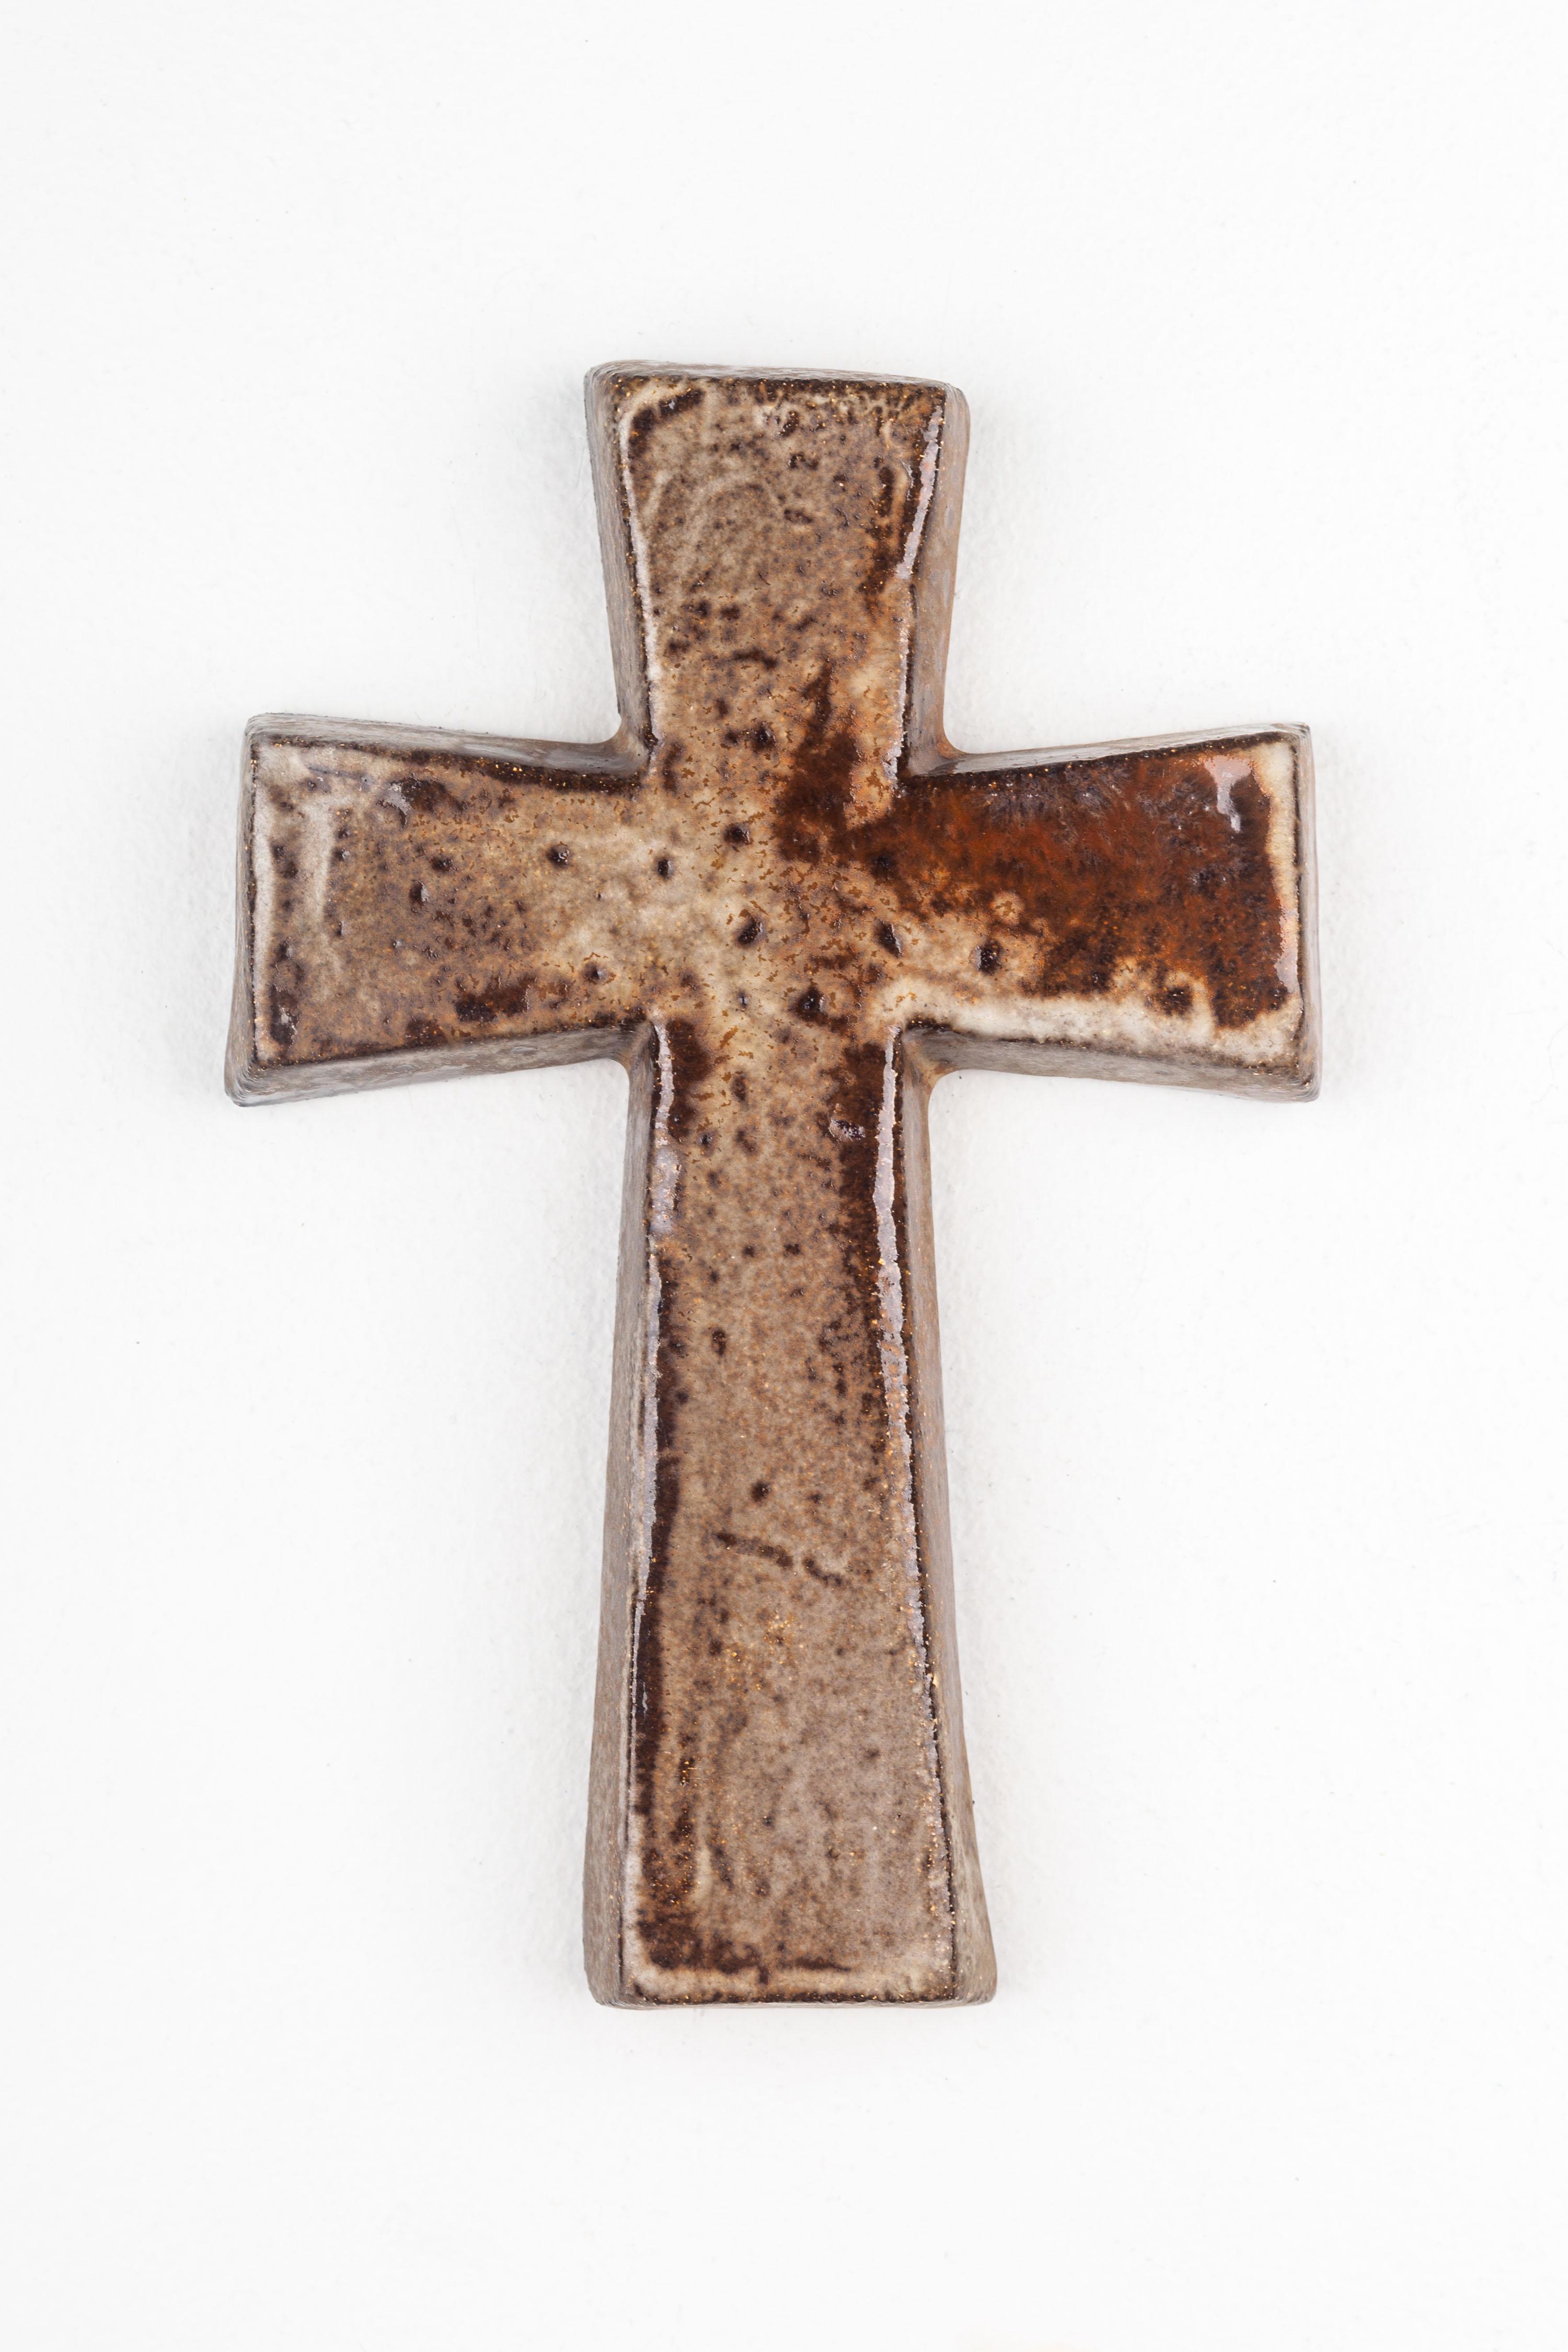 This mid-century modern wall cross is a quintessential example of European studio pottery from the 1950s. Handcrafted by a skilled artisan, it showcases the raw beauty of ceramic artistry that was prevalent during the post-war era. The cross's